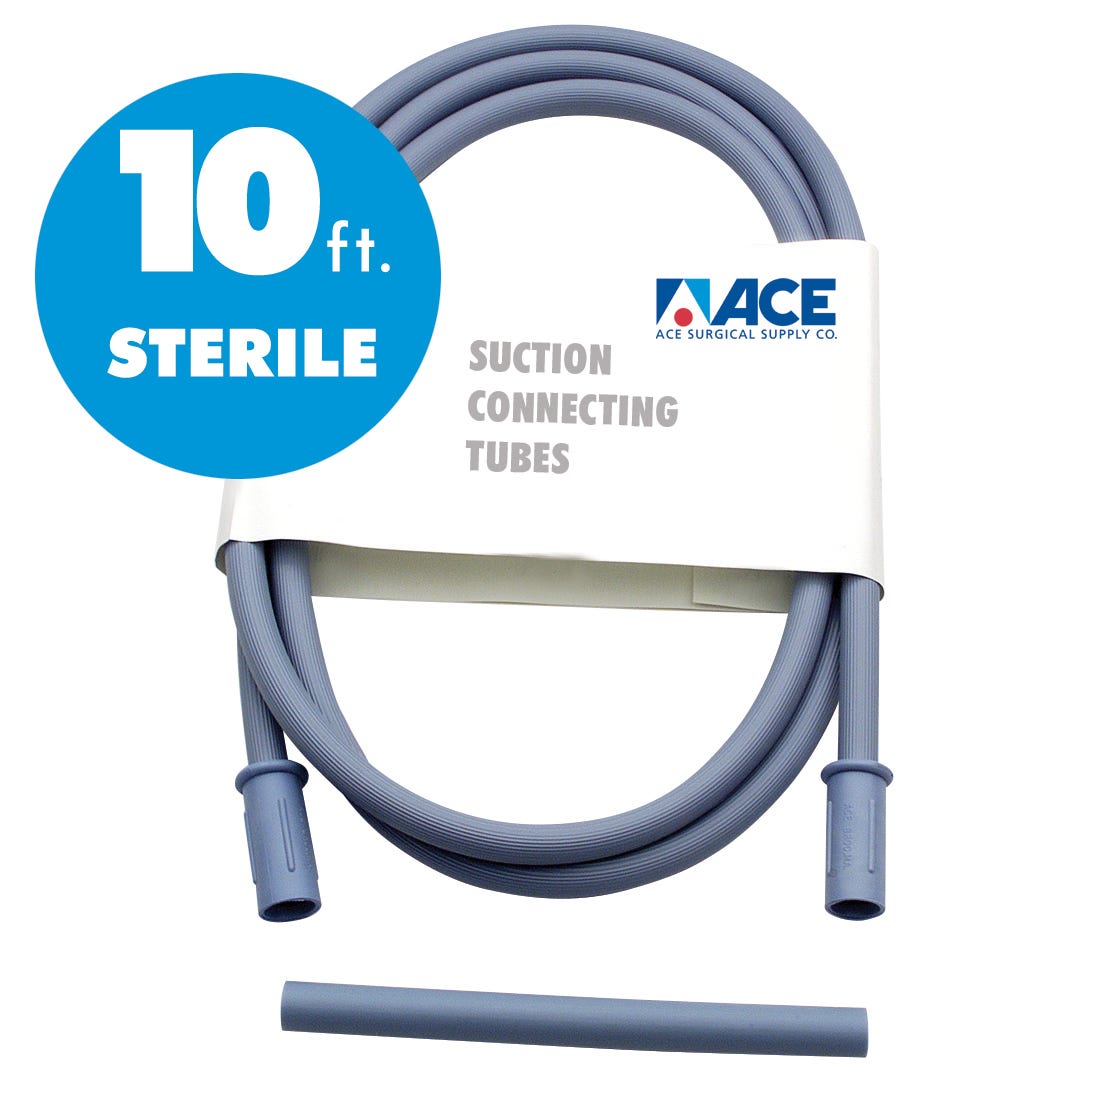 ACE Suction Connection Tubing Sterile - Opaque Blue with Adapter, 10' long -20/Case